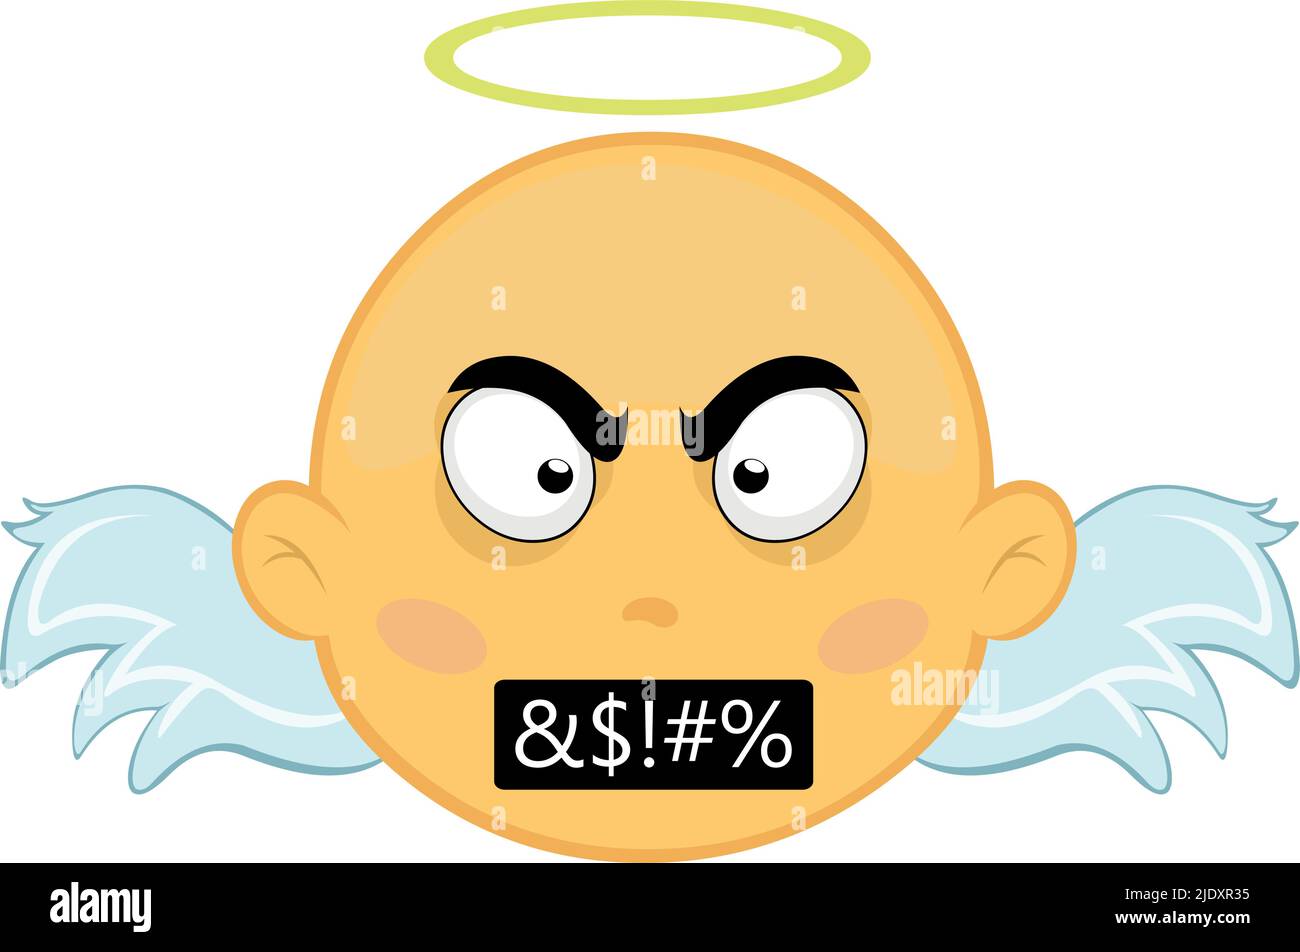 Vector illustration of a yellow cartoon angel face with censored insults Stock Vector